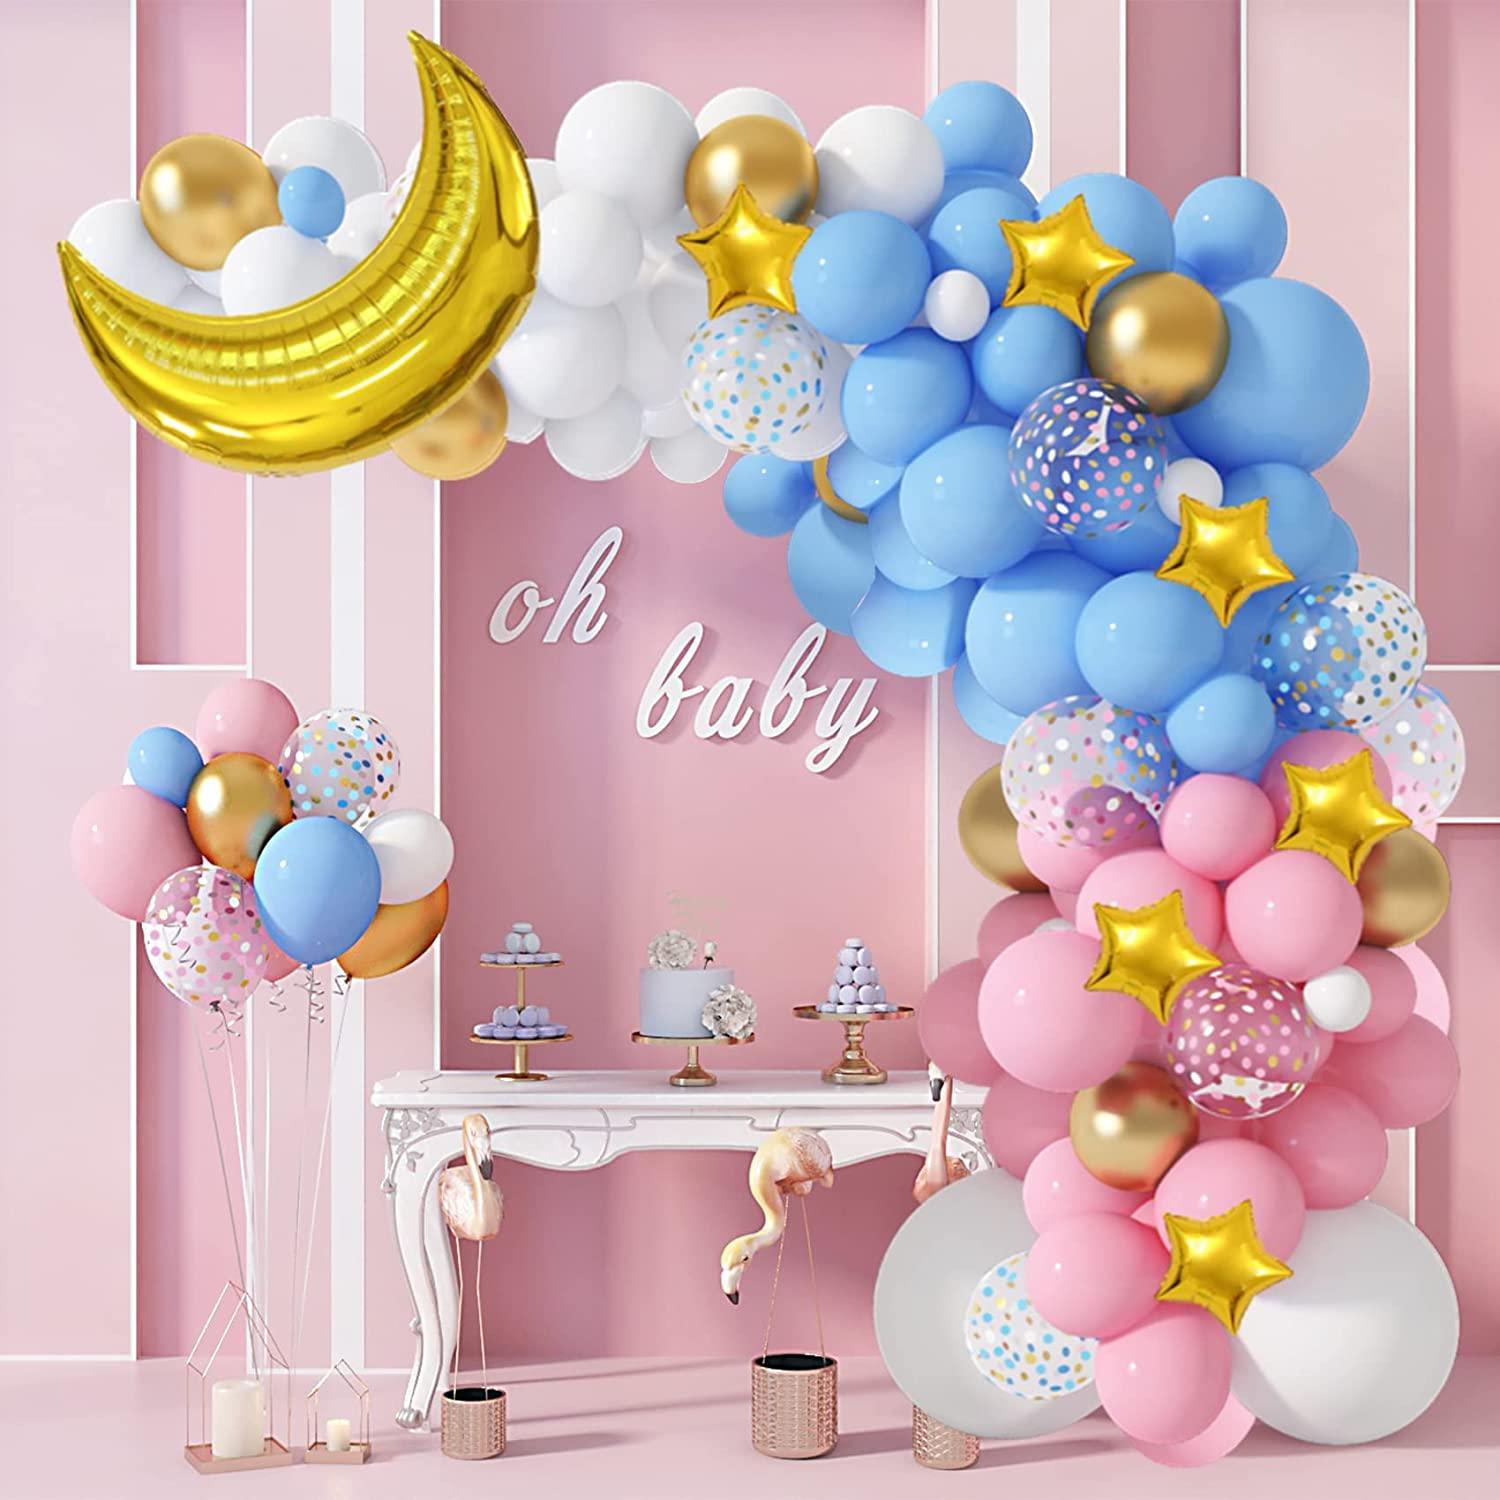 Gender Reveal Party Decoration Boy or Girl Party Supplies with Baby Boxes  36 Inch Gender Reveal Balloon Pink and Blue Gender Reveal Balloons Garland